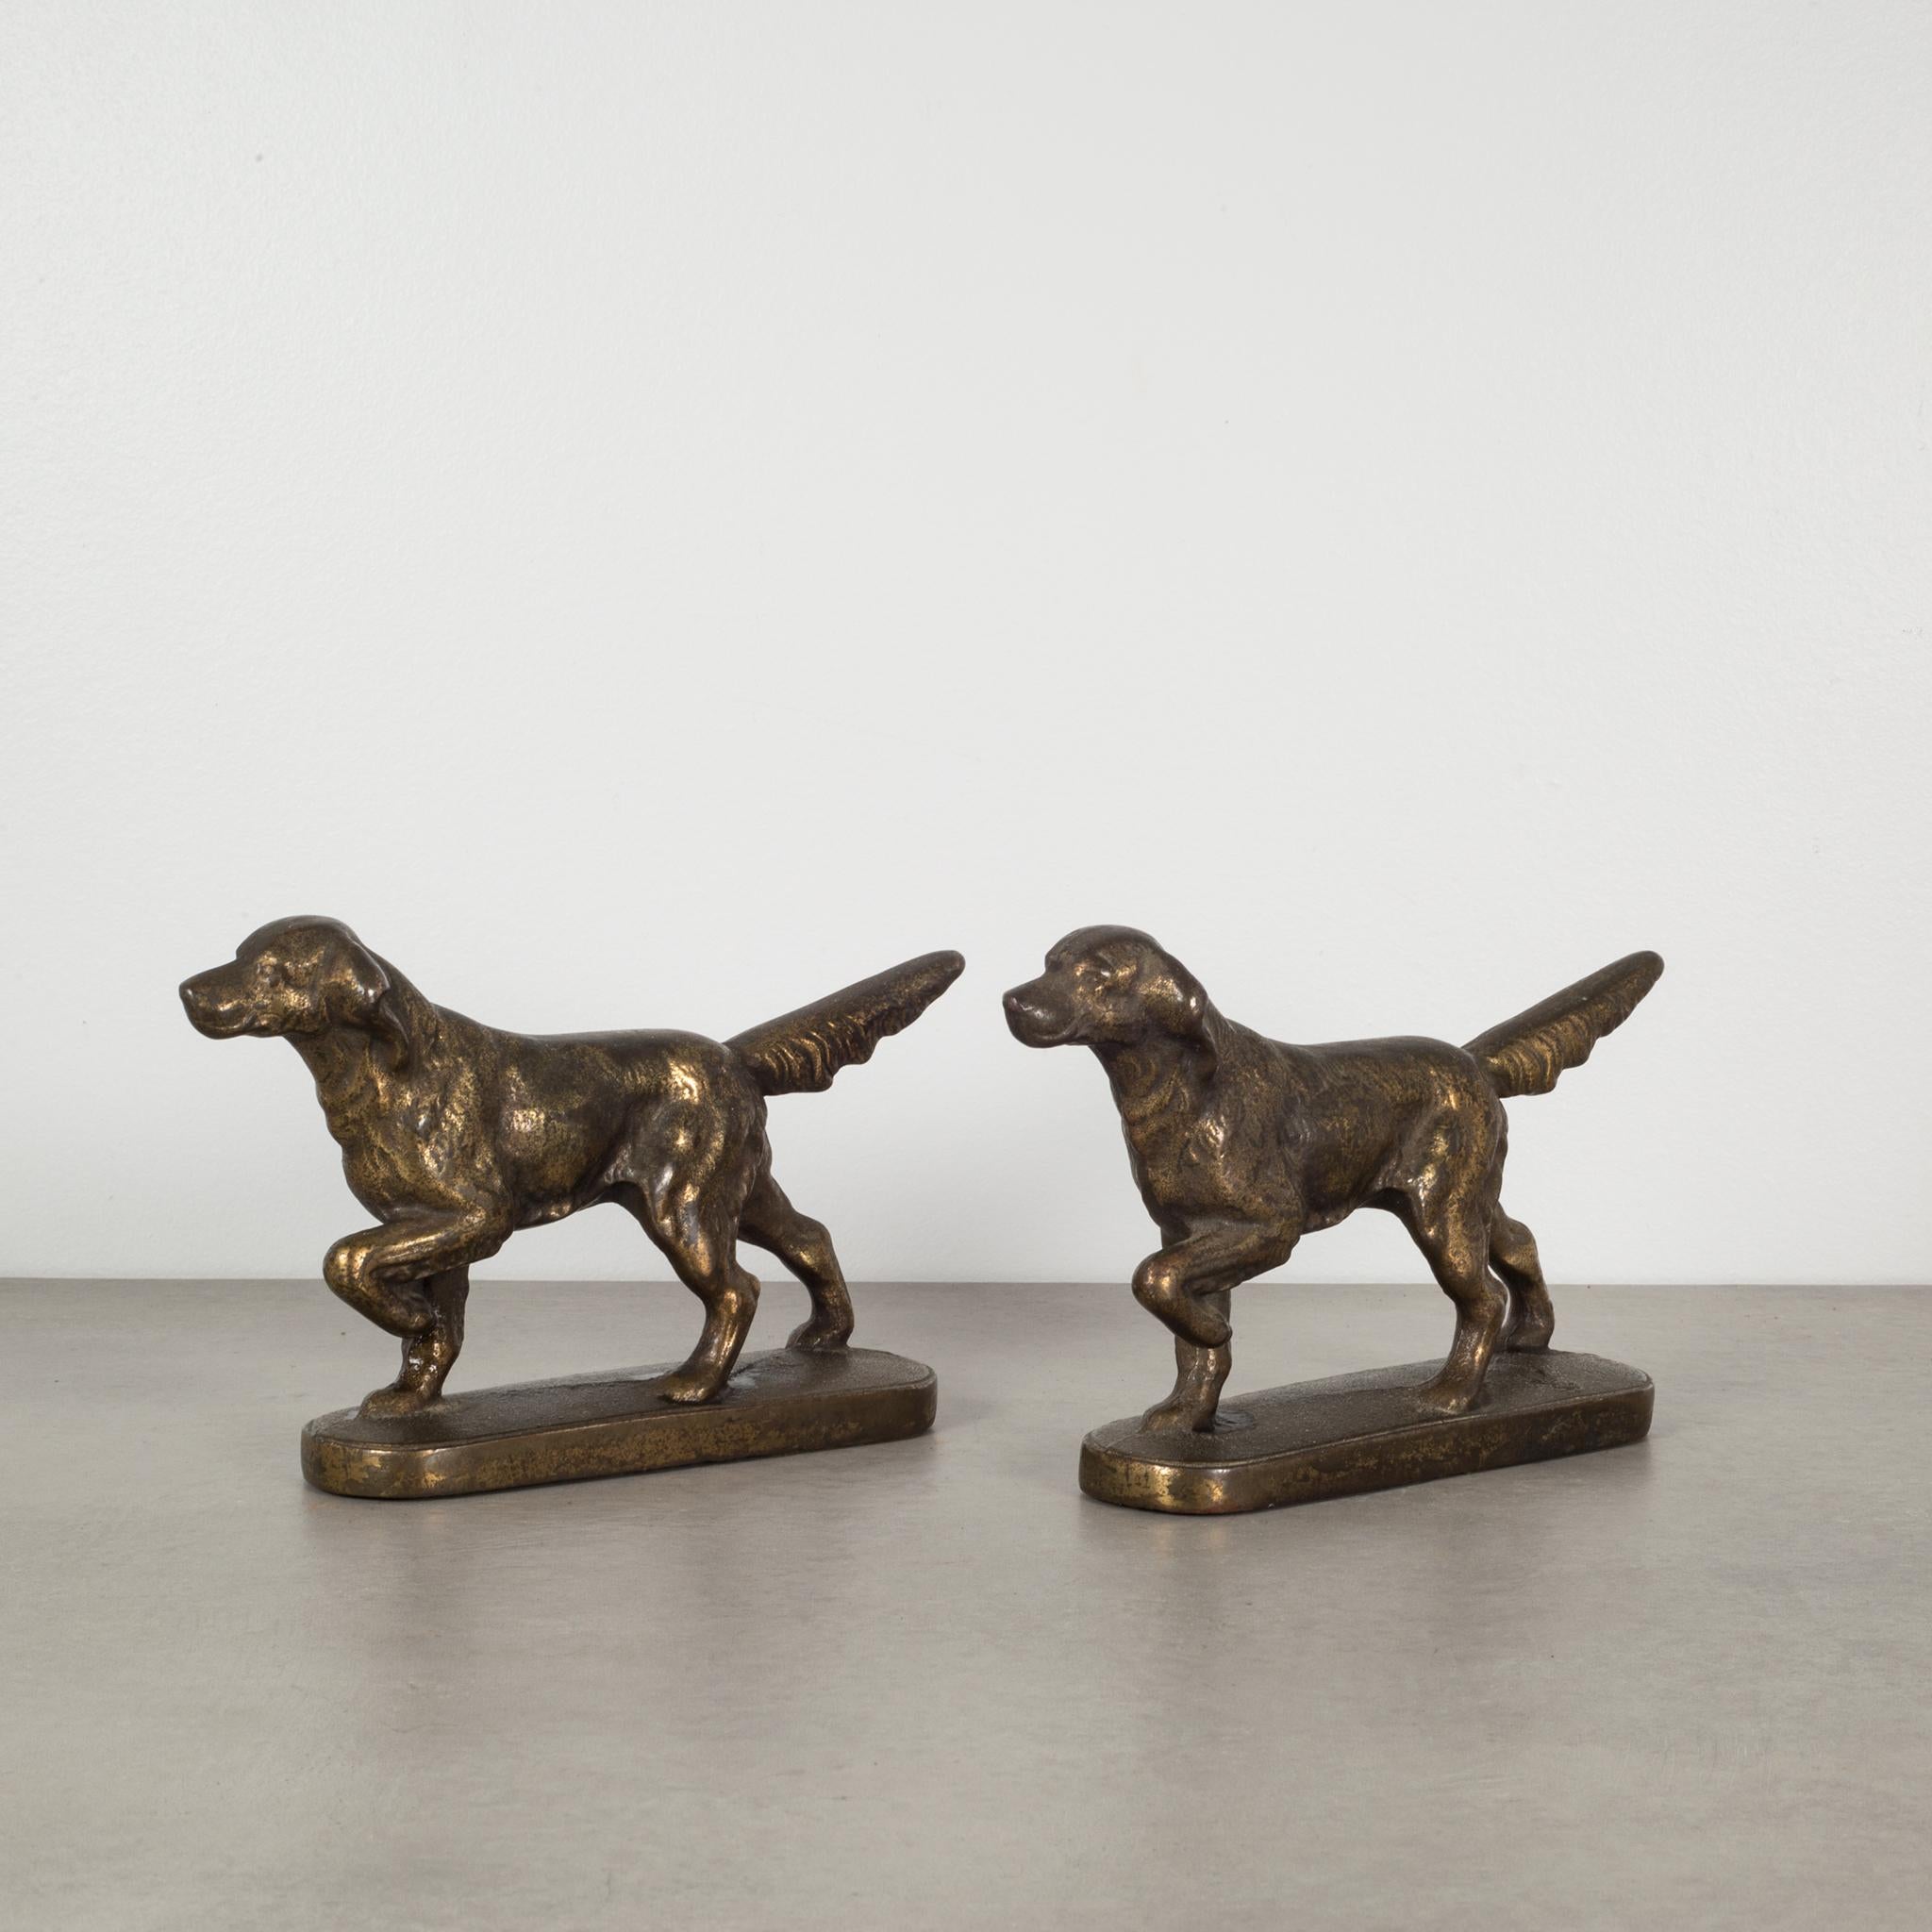 About

This is a pair of original bronze-plated solid steel bookends of pointer dogs. The style is similar to Hubley bookends from the same period. Both bookends are in good condition and have retained some of their bronze finish and have the